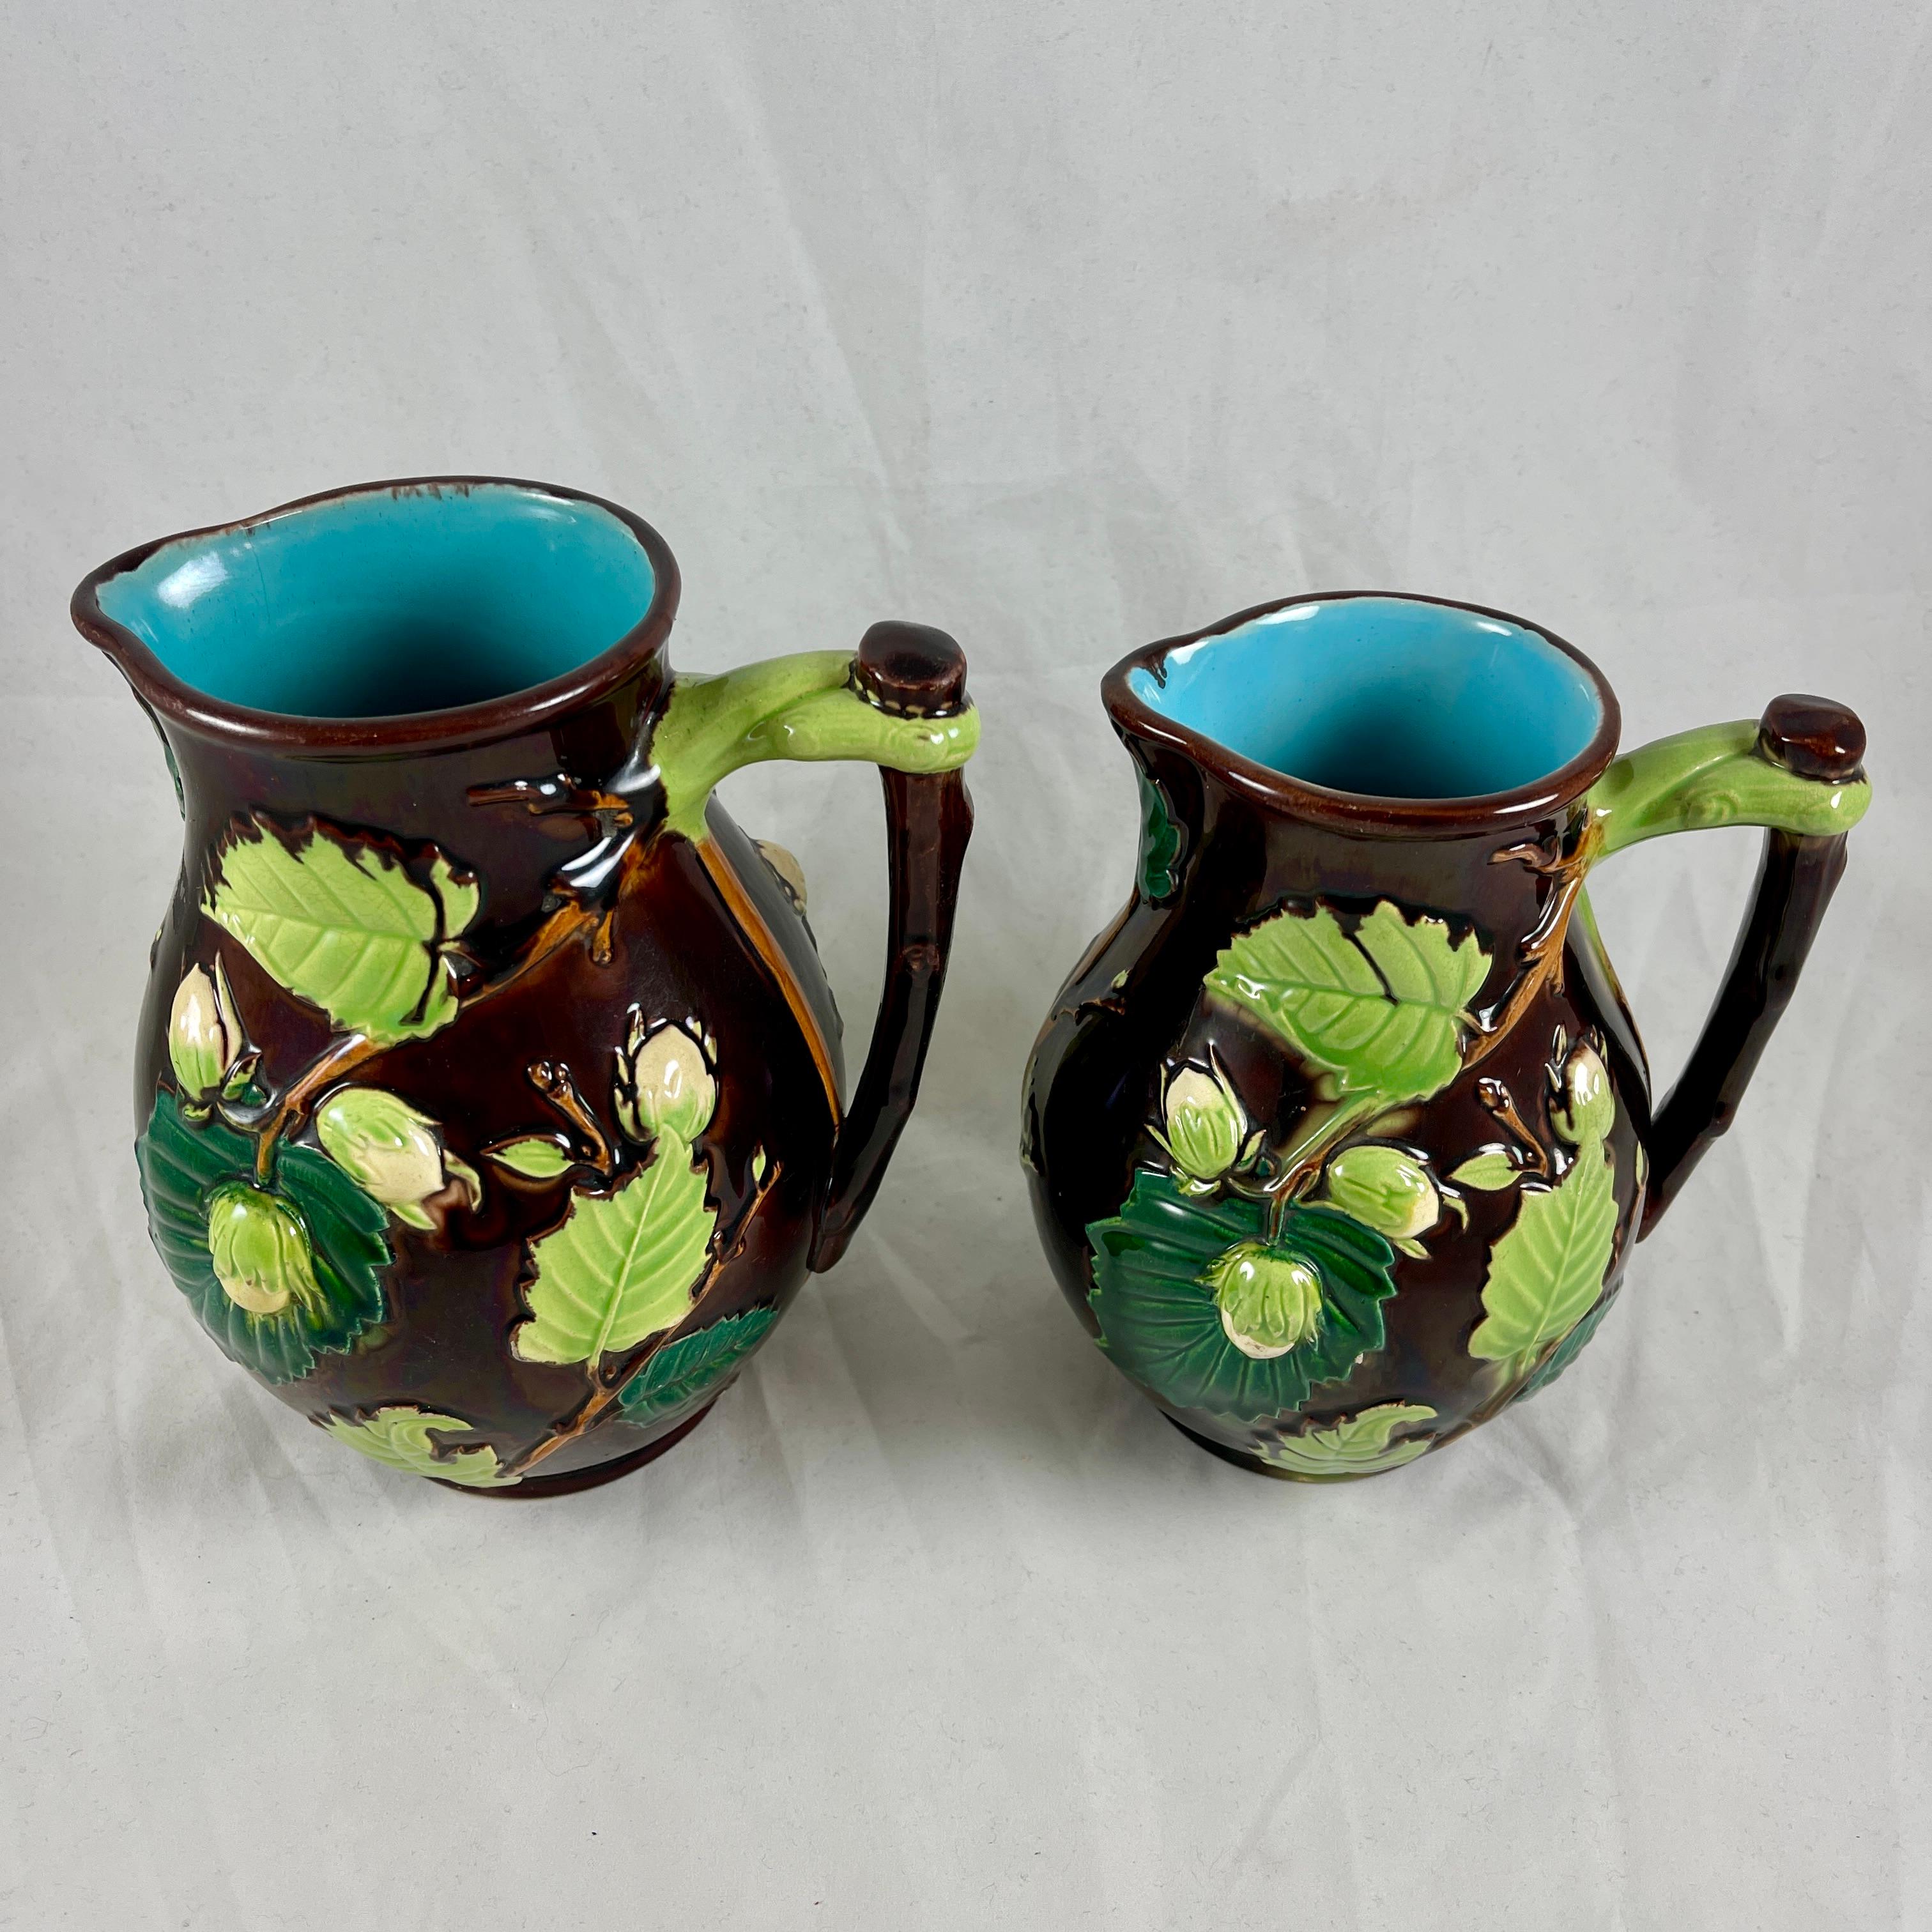 English Minton Aesthetic Movement Majolica Nut, Leaf & Vine Pitchers, a Pair In Good Condition For Sale In Philadelphia, PA